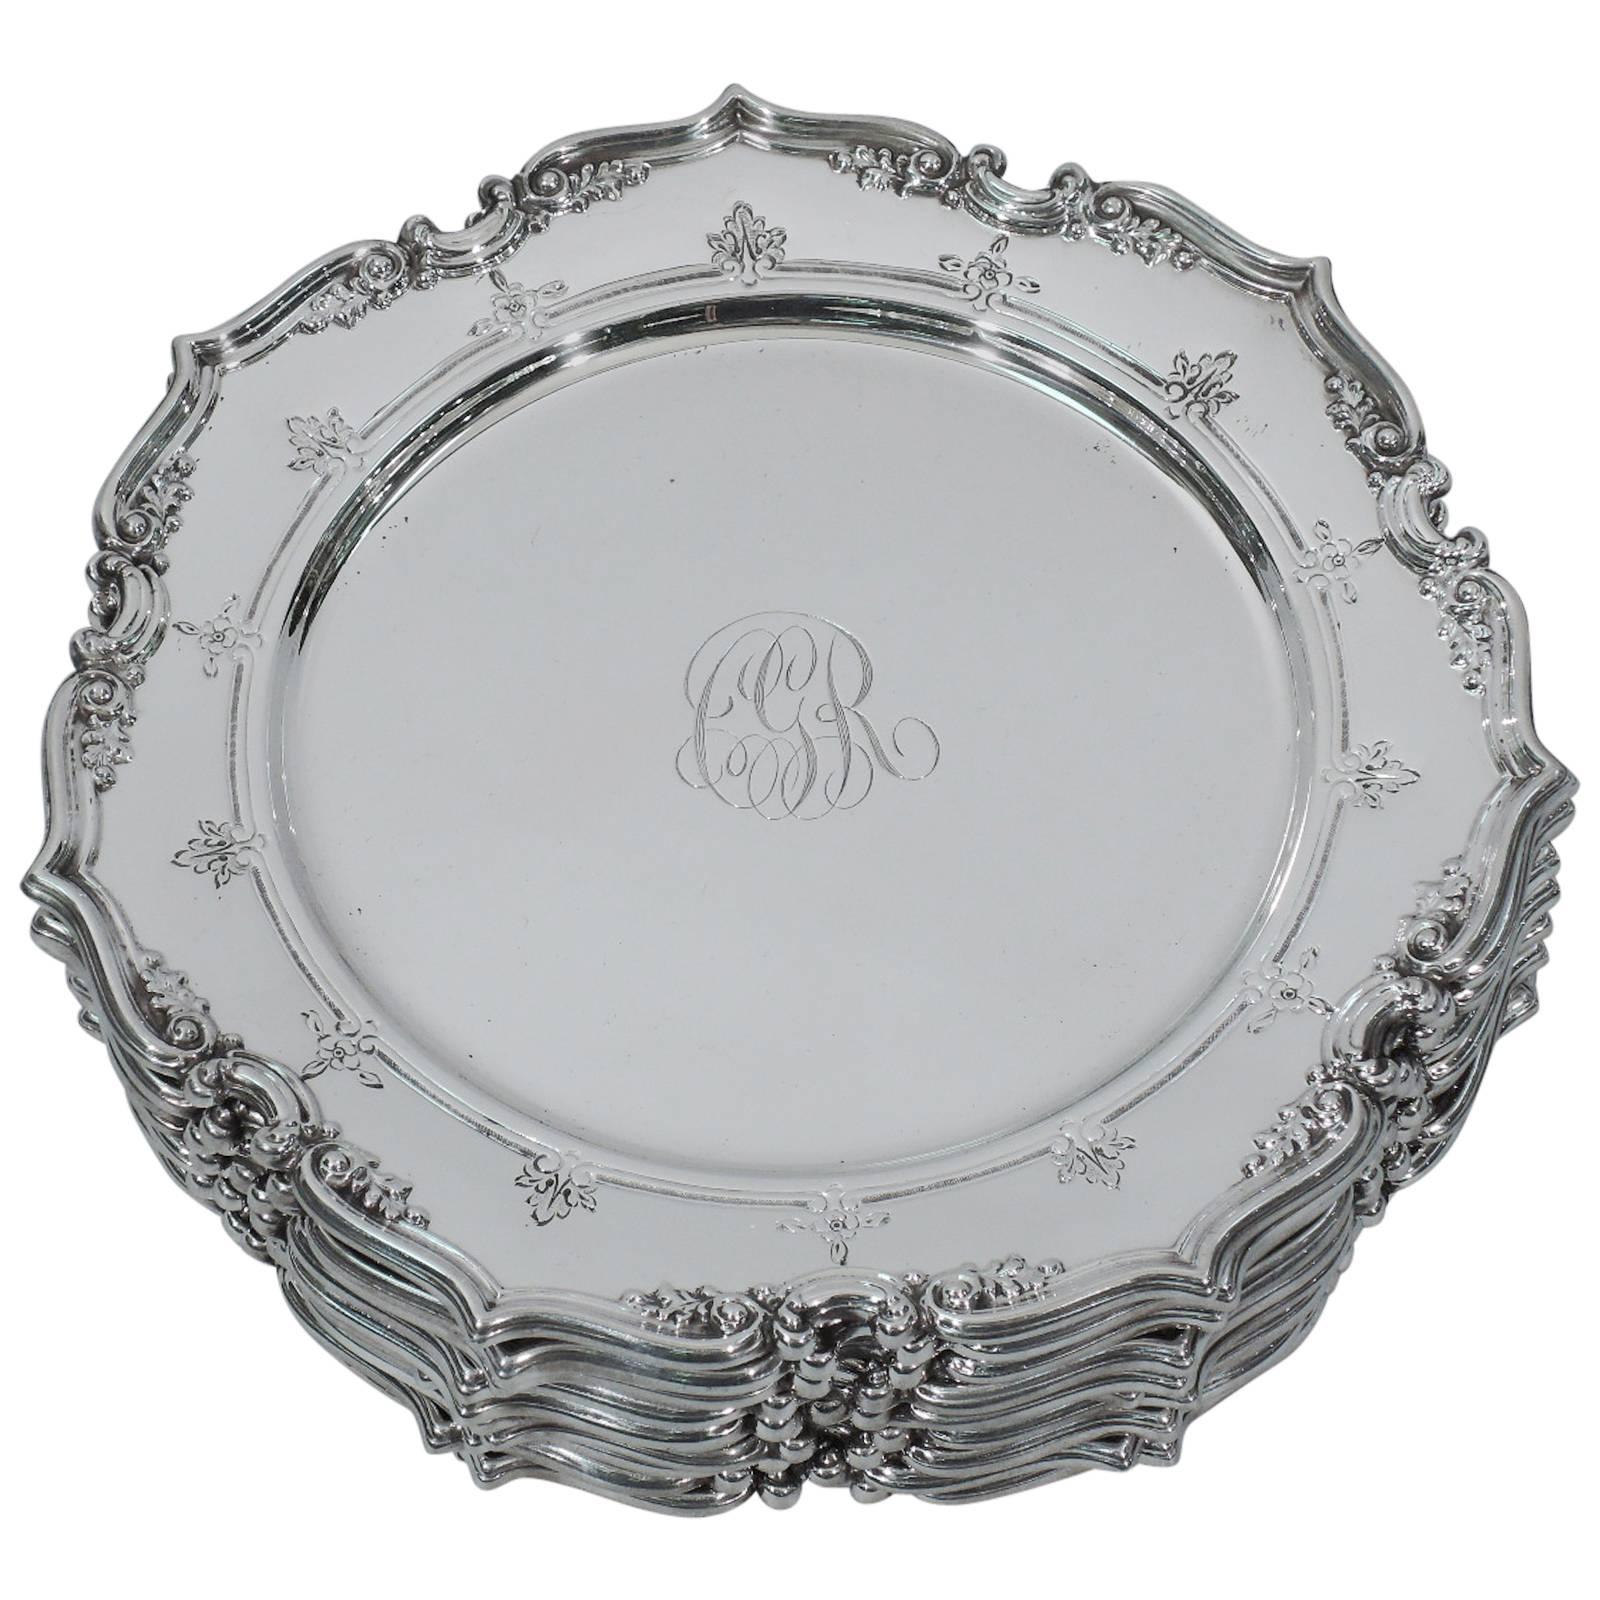 Set of 12 Gorham Sterling Silver Bread and Butter Plates with Fancy Scrolls